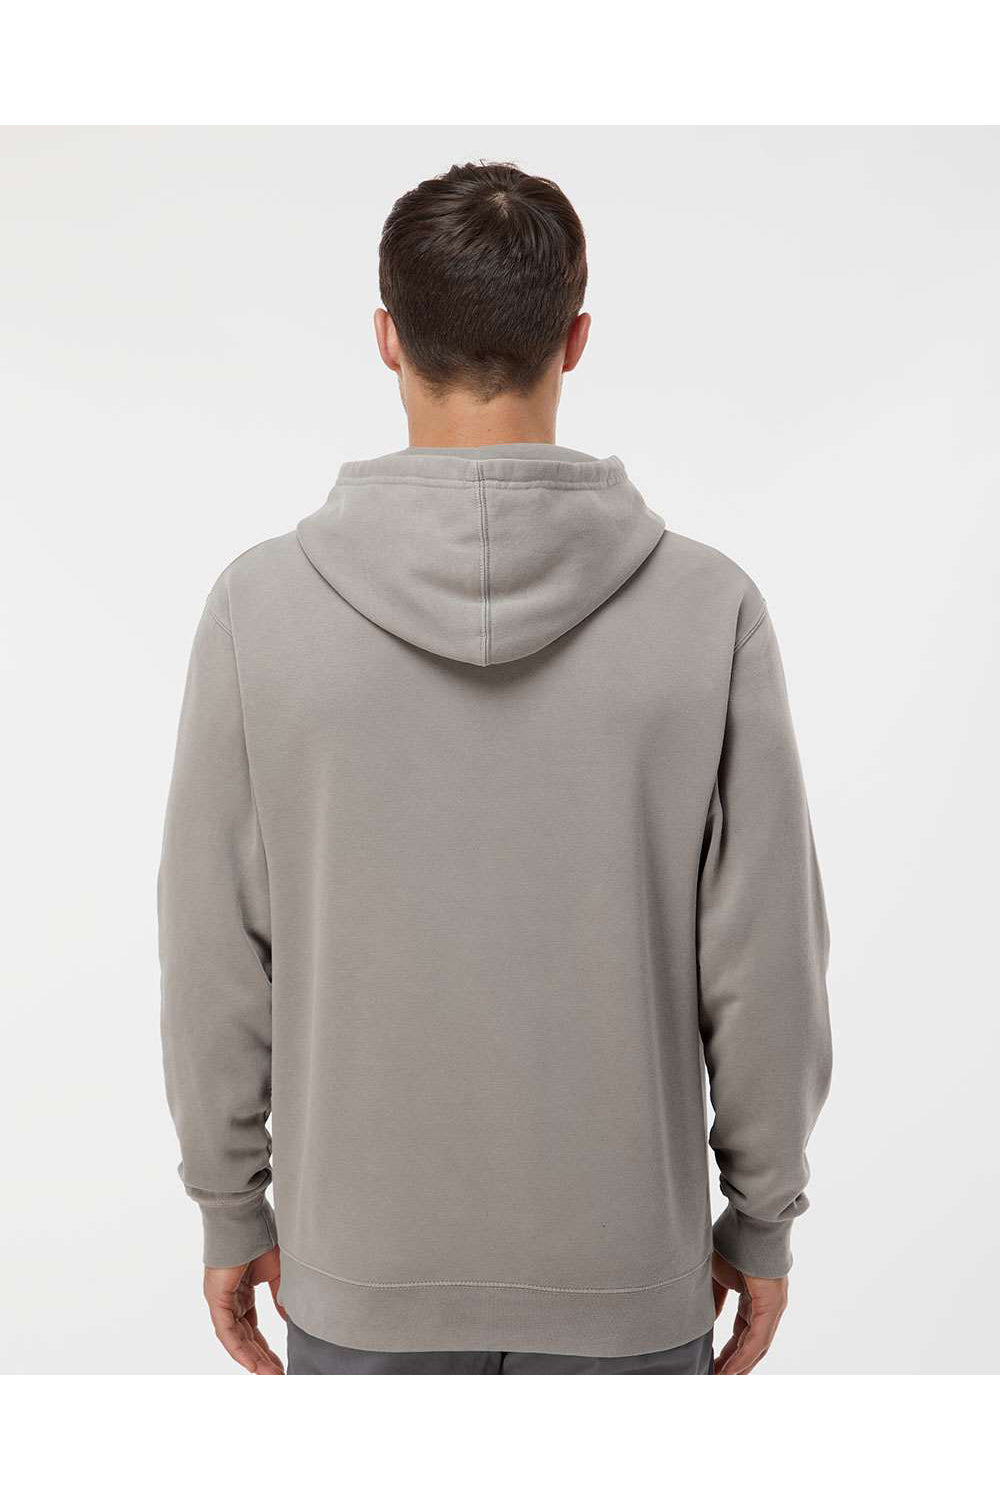 Independent Trading Co. PRM4500 Mens Pigment Dyed Hooded Sweatshirt Hoodie Cement Grey Model Back